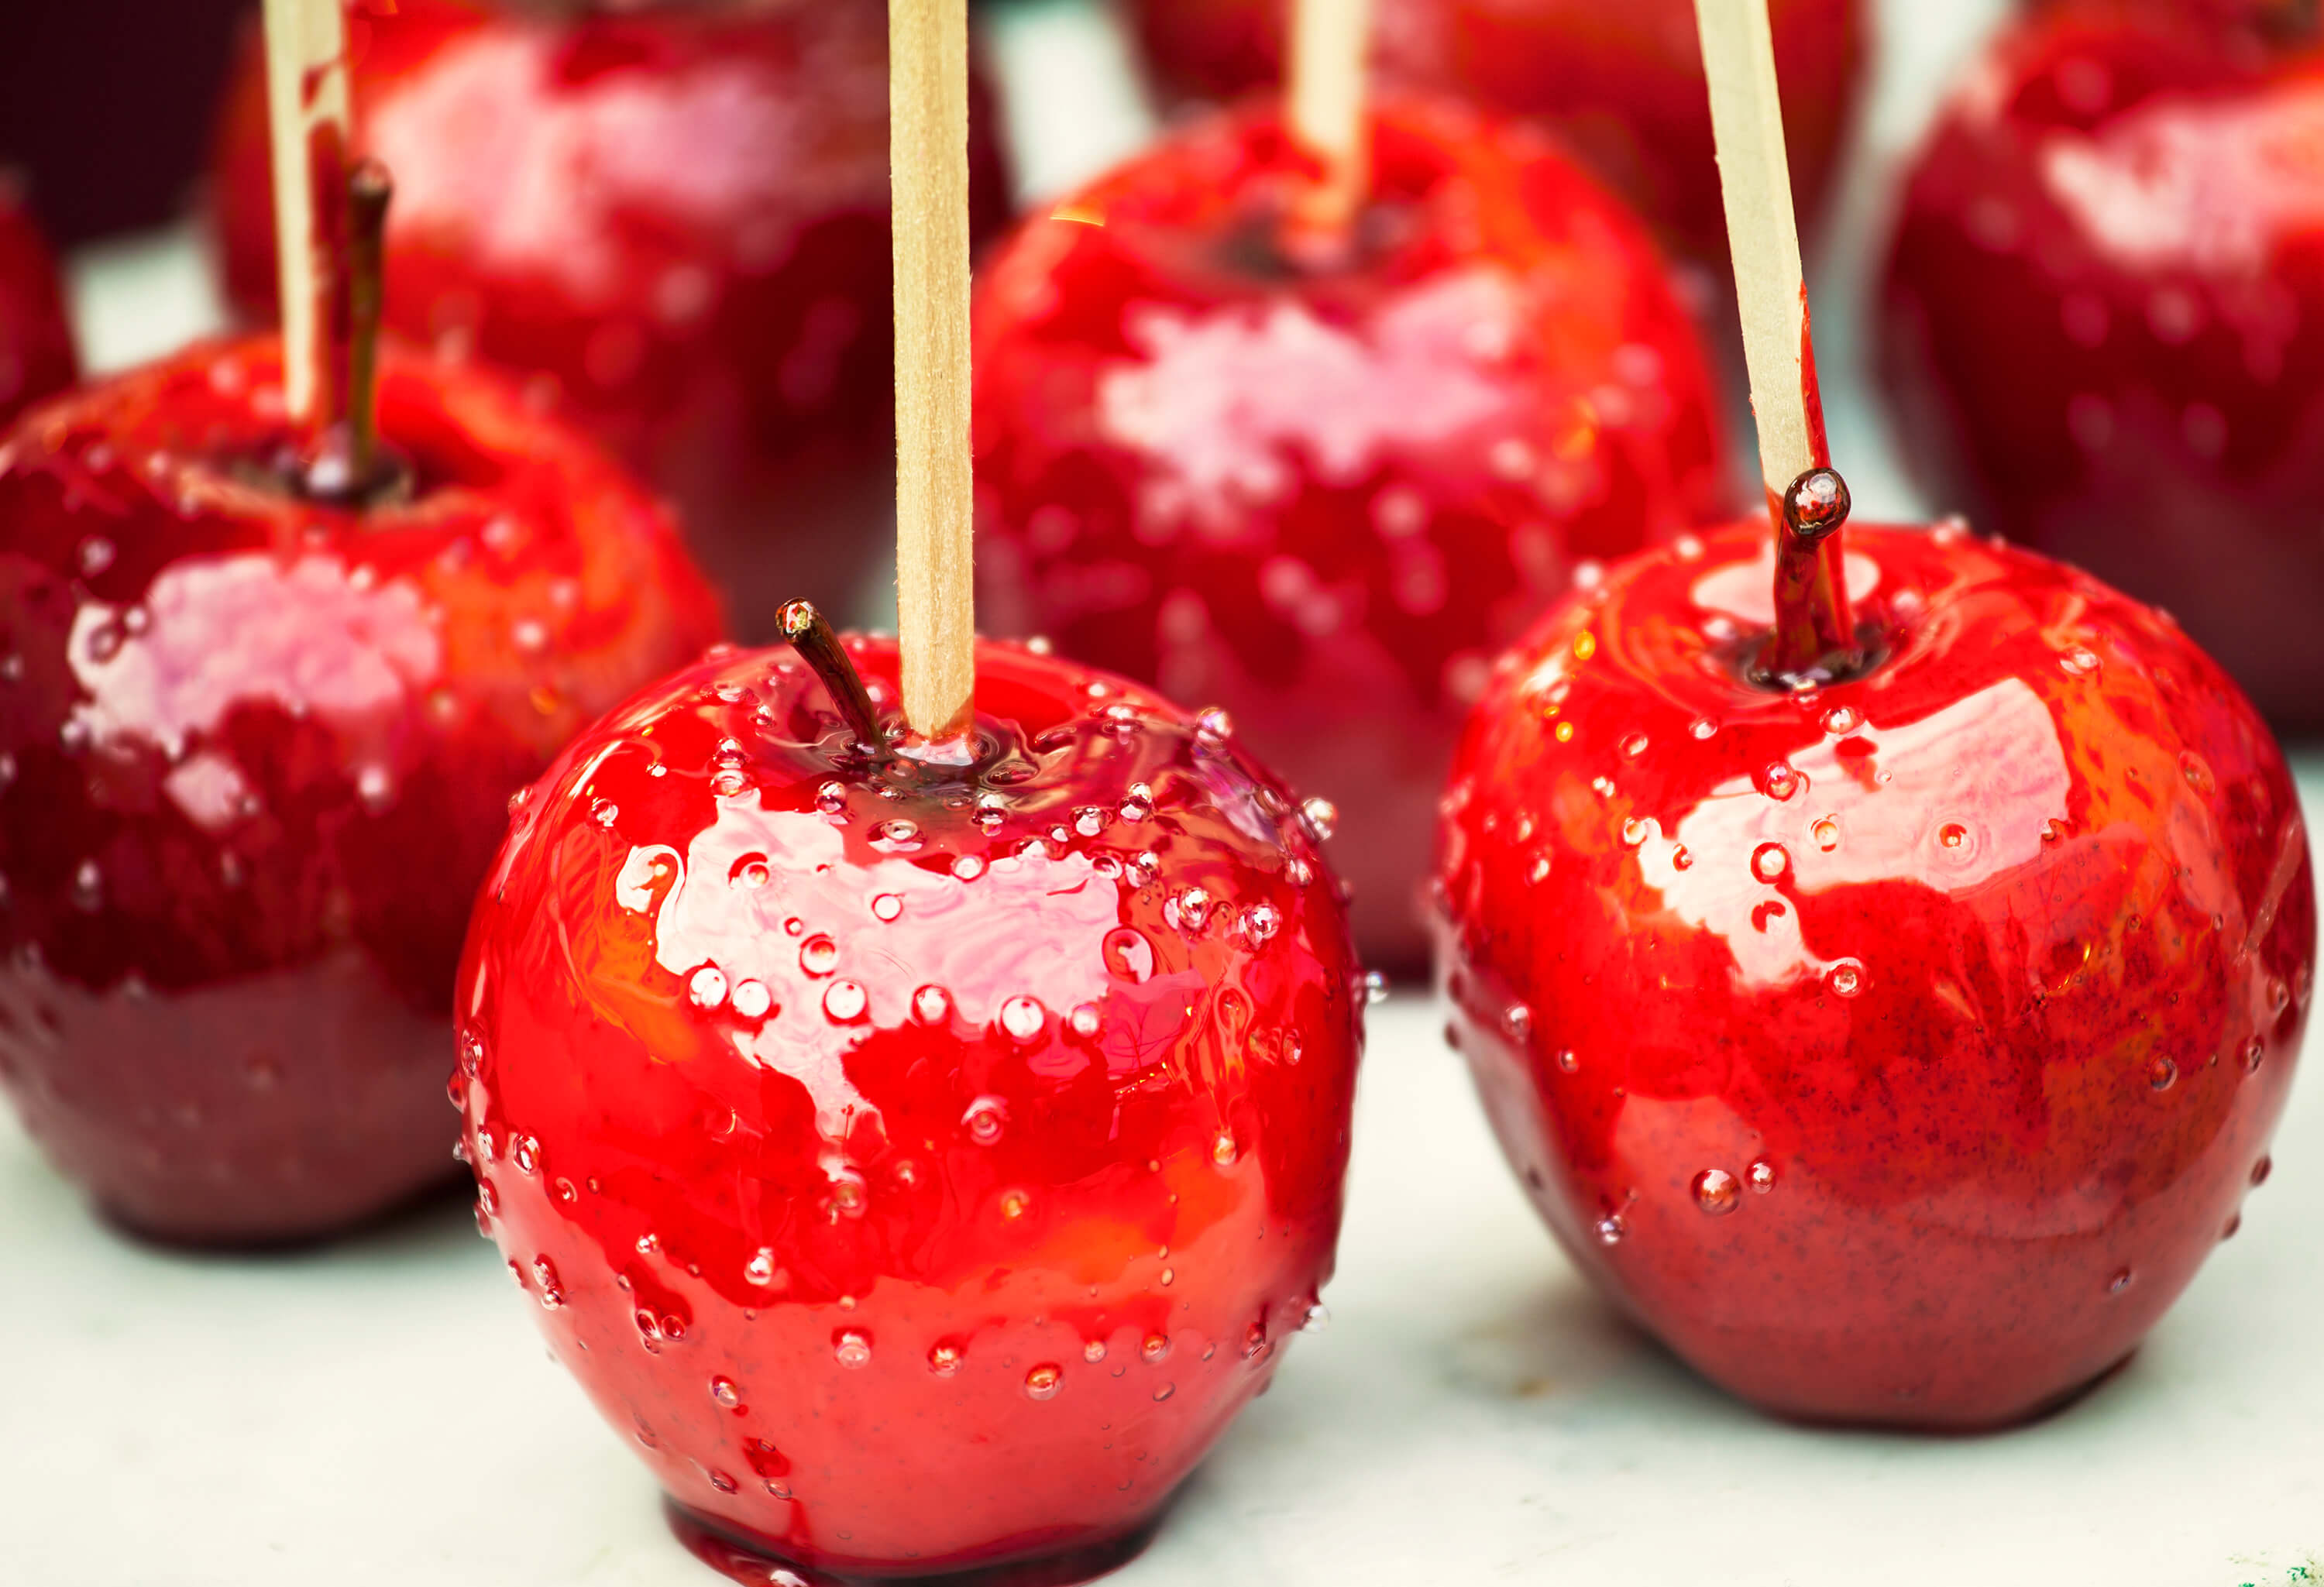 Best Apples for Red Candy Apples | Apple for That